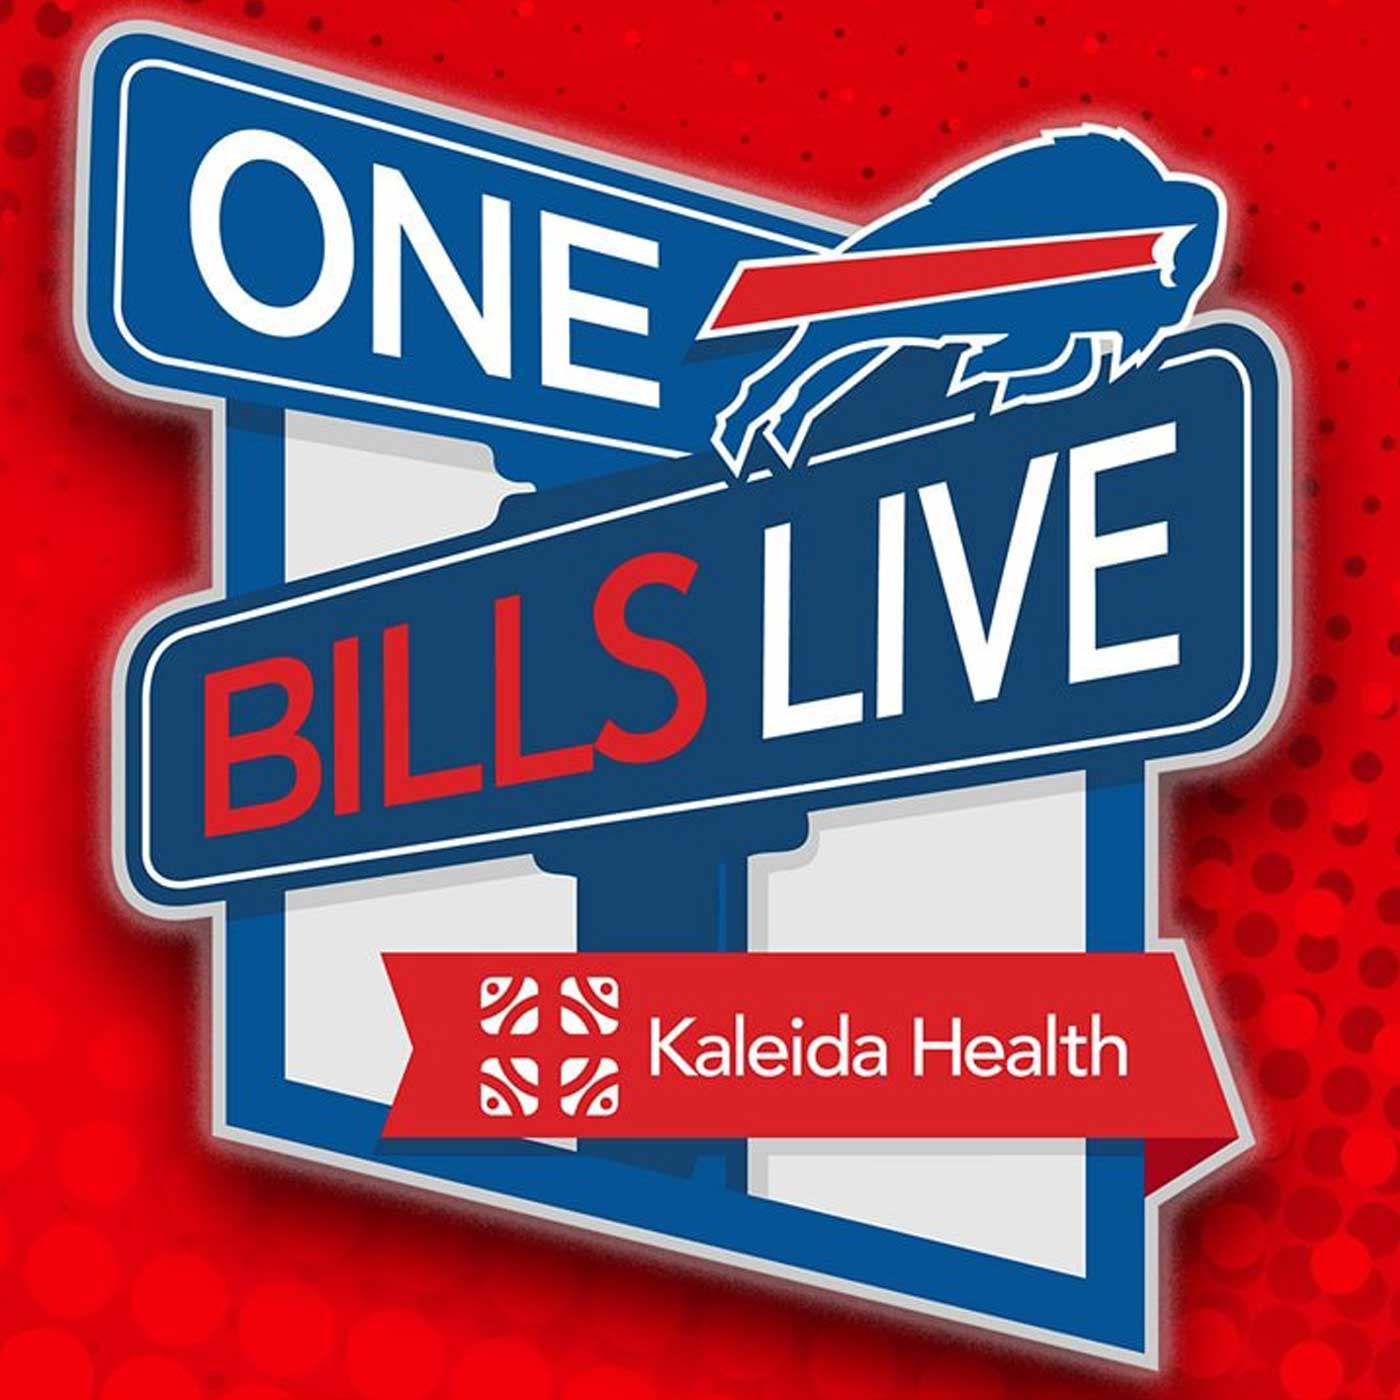 OBL 10/18: "The Lo-Down" with Lorenzo Alexander, Greg Cosell, James Lofton, Andrew Catalon, and Channing Crowder break down Bills-Dolphins